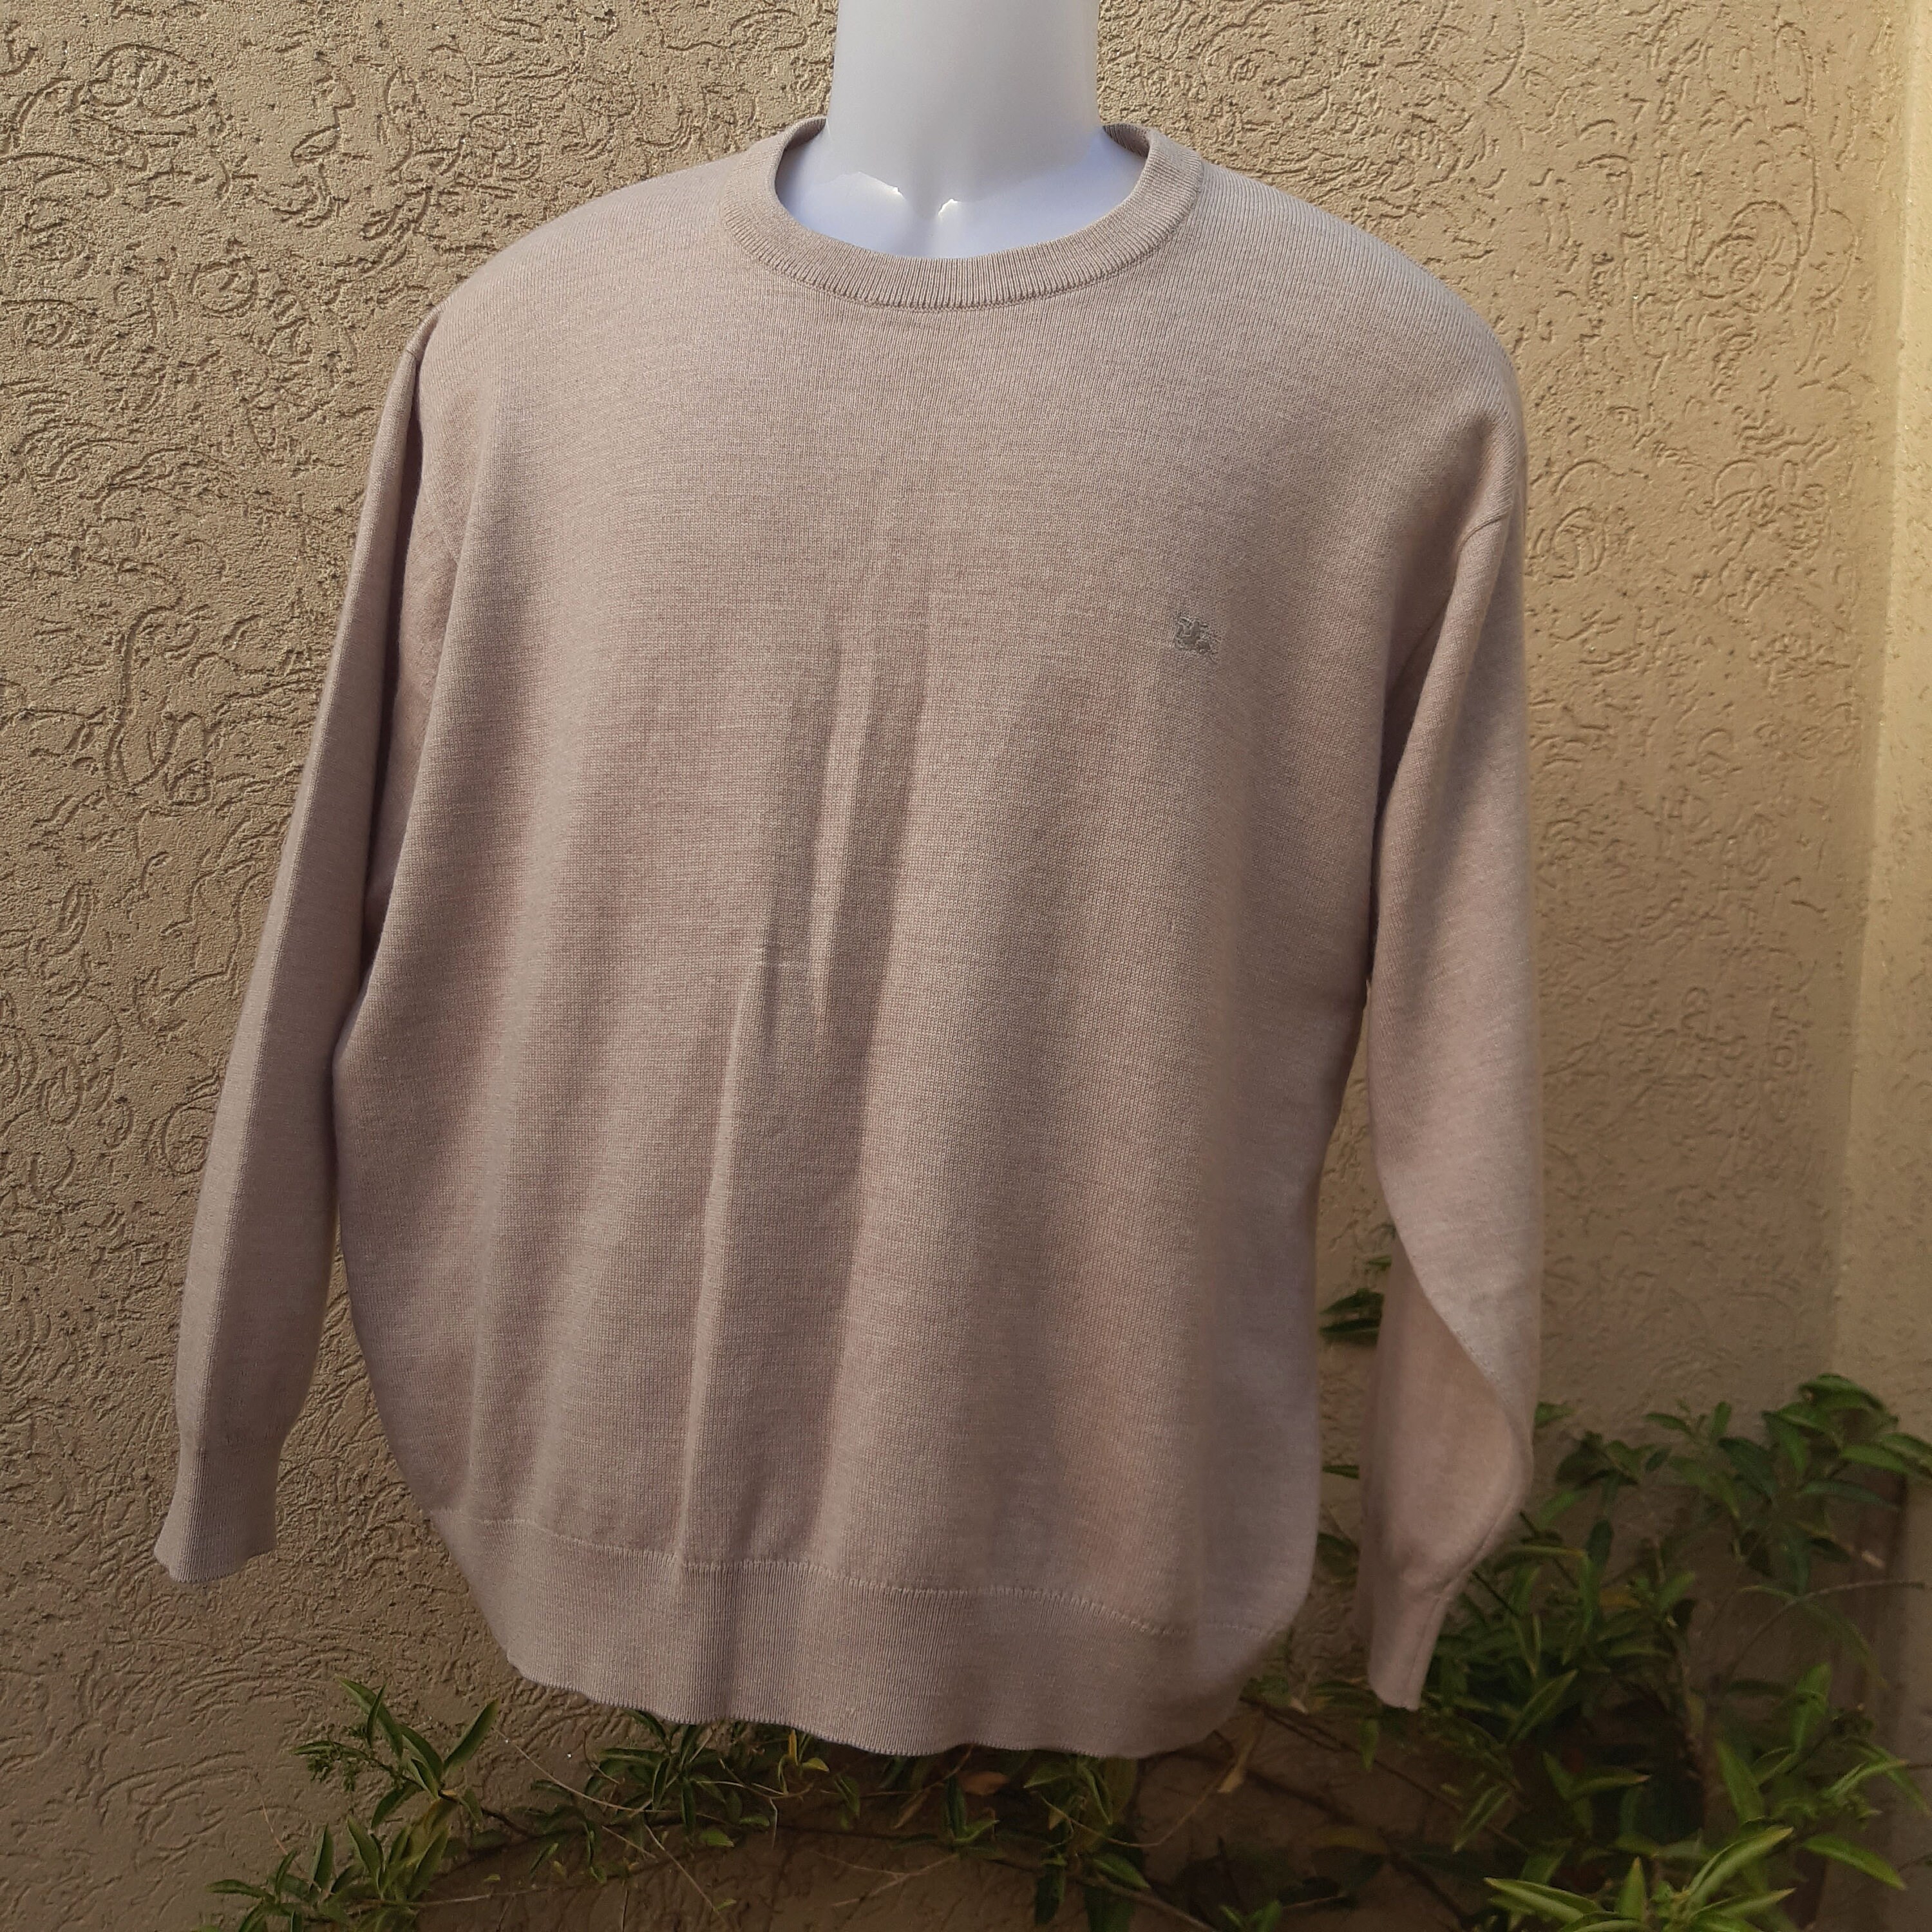 Fashion Saters Crewneck Saters WE Crewneck Sweater brown-cream flecked casual look 